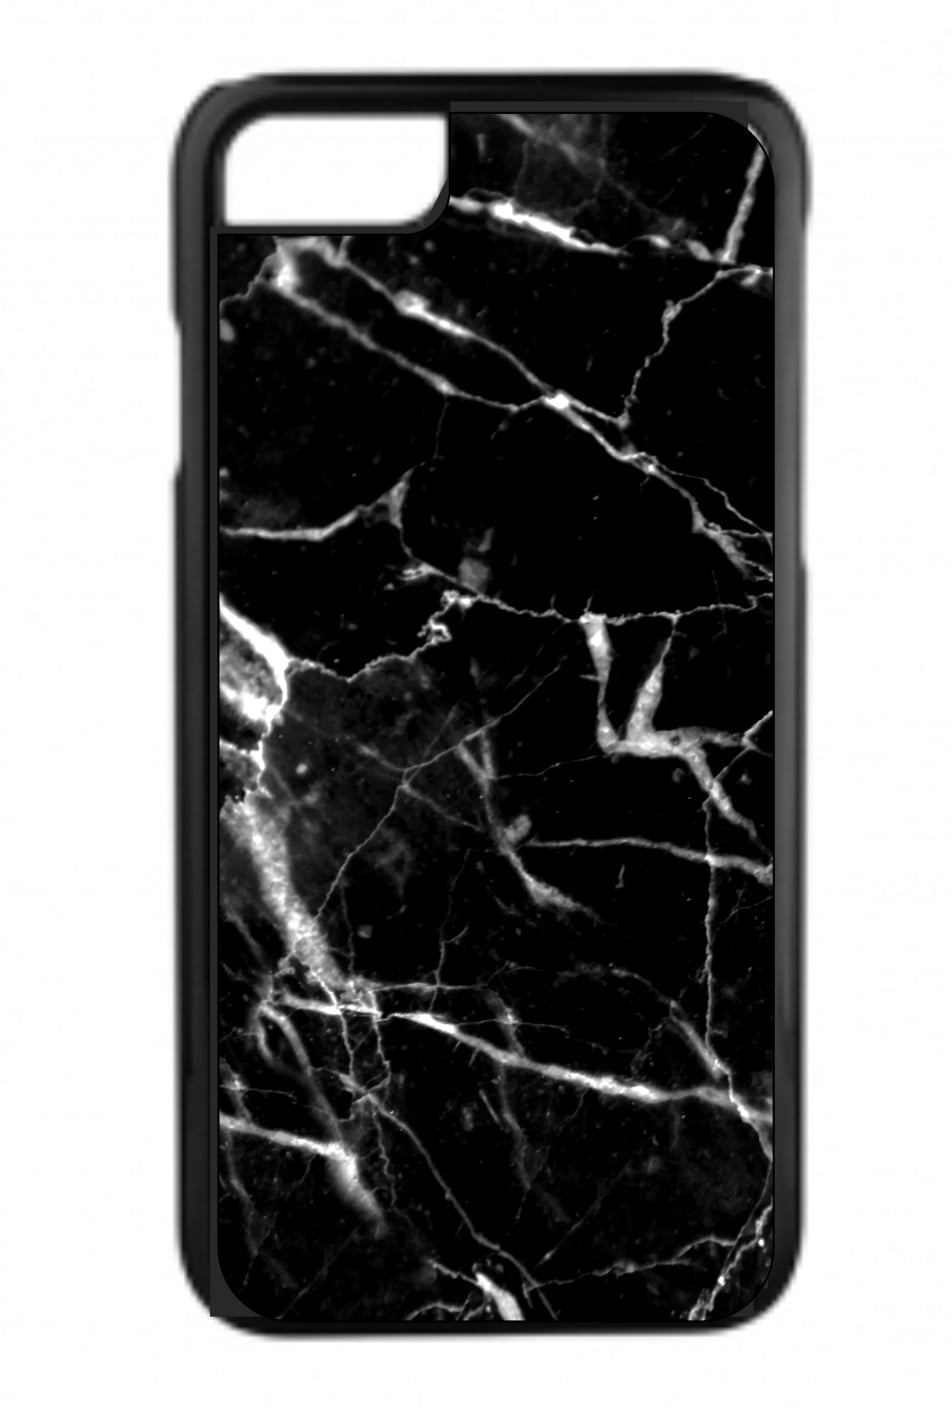 Black and White Marble Print Design Black Rubber Phone Case That Is